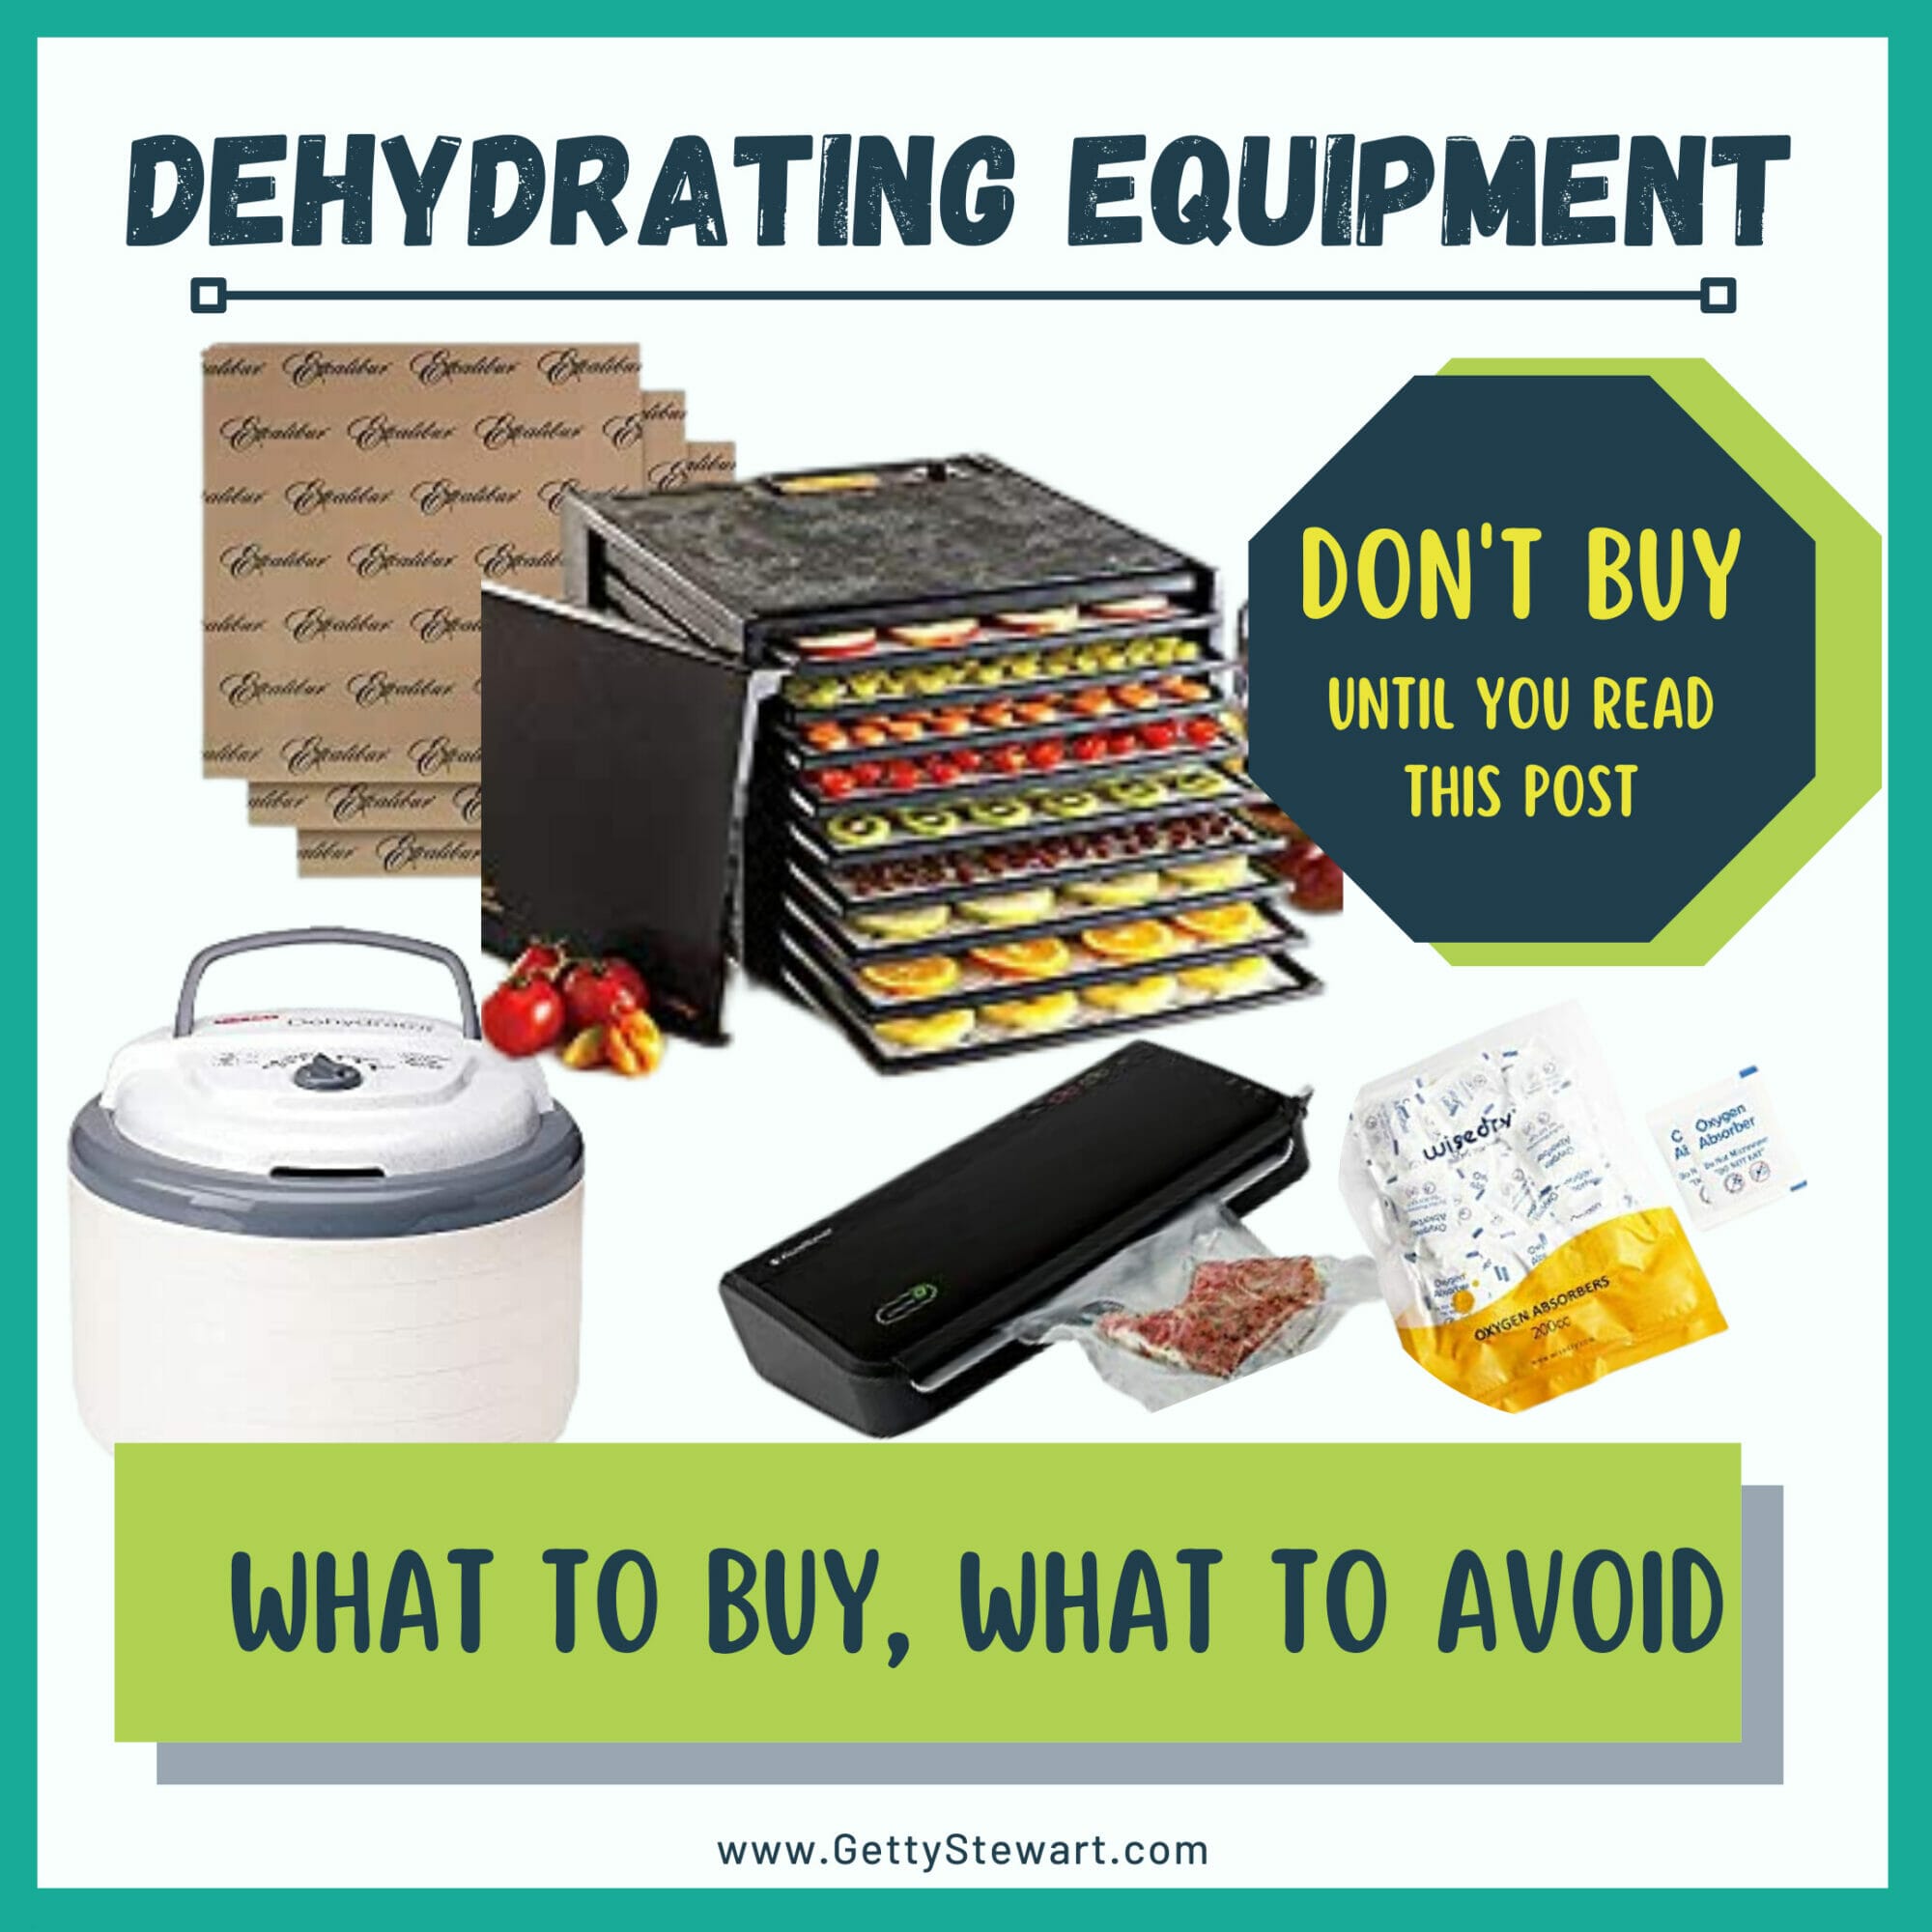 Ultimate Dehydrator Cookbook - A Must Have for Every PREPared Kitchen -  Simple Family Preparedness